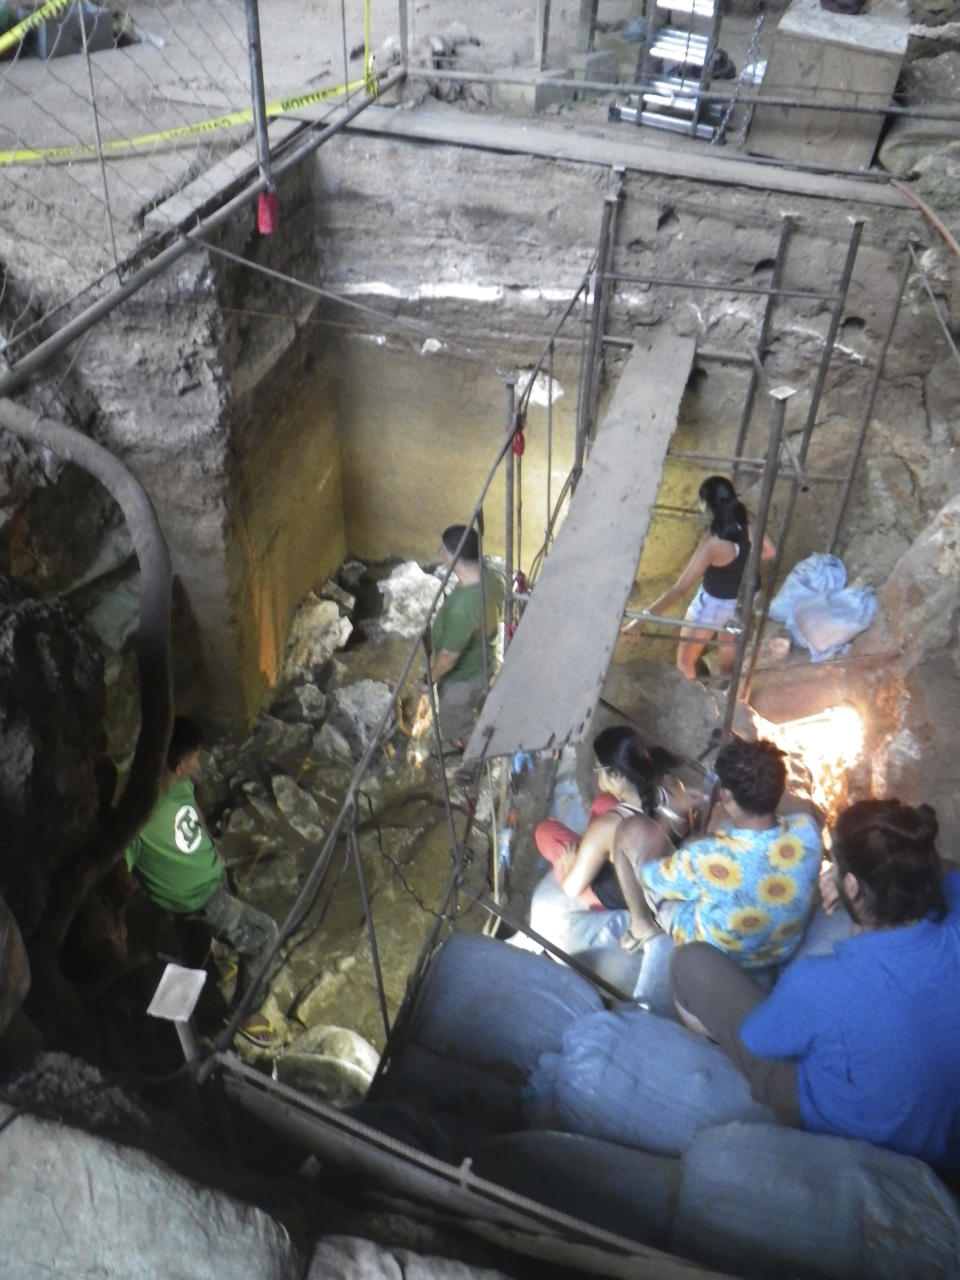 In this June 30, 2015 handout photo provided by Eusebio Dizon, foreign and Filipino archeologists work inside Callao cave in Cagayan province, northern Philippines where they recovered fossil bones and teeth belonging to a new human species they called Homo Luzonensis. Archaeologists who discovered fossil bones and teeth of a previously unknown human species that thrived more than 50,000 years ago in the northern Philippines say they plan more diggings and better protection of the popular limestone cave complex where the remains were unearthed. (Eusebio Dizon via AP)